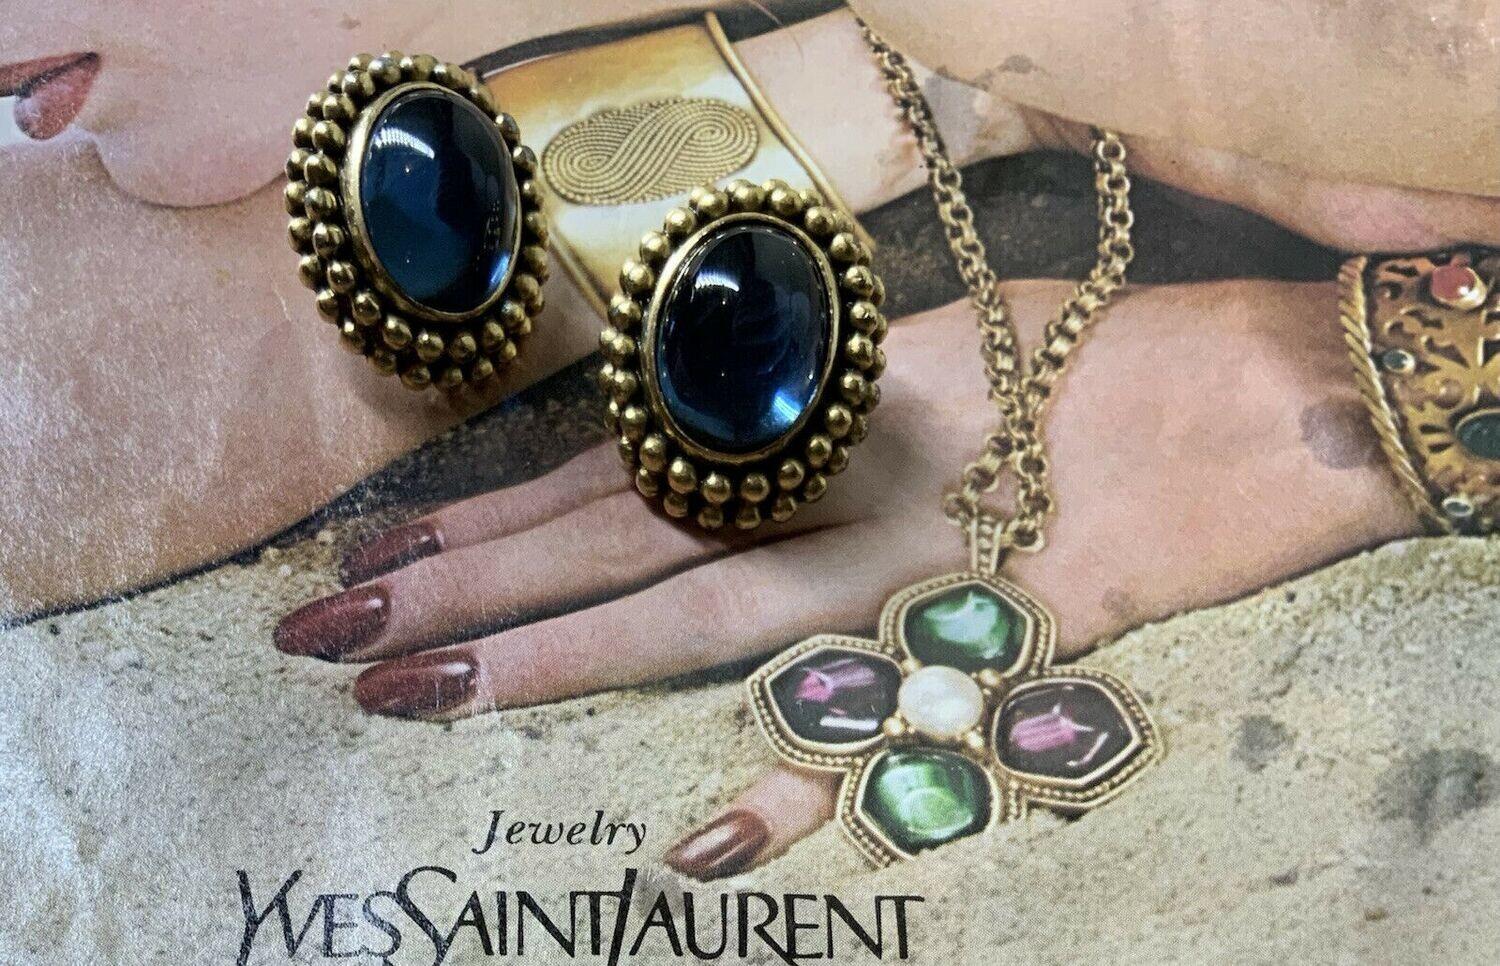 Vintage Yves Saint-Laurent earrings, resin and gold metal Perfect vintage condition
